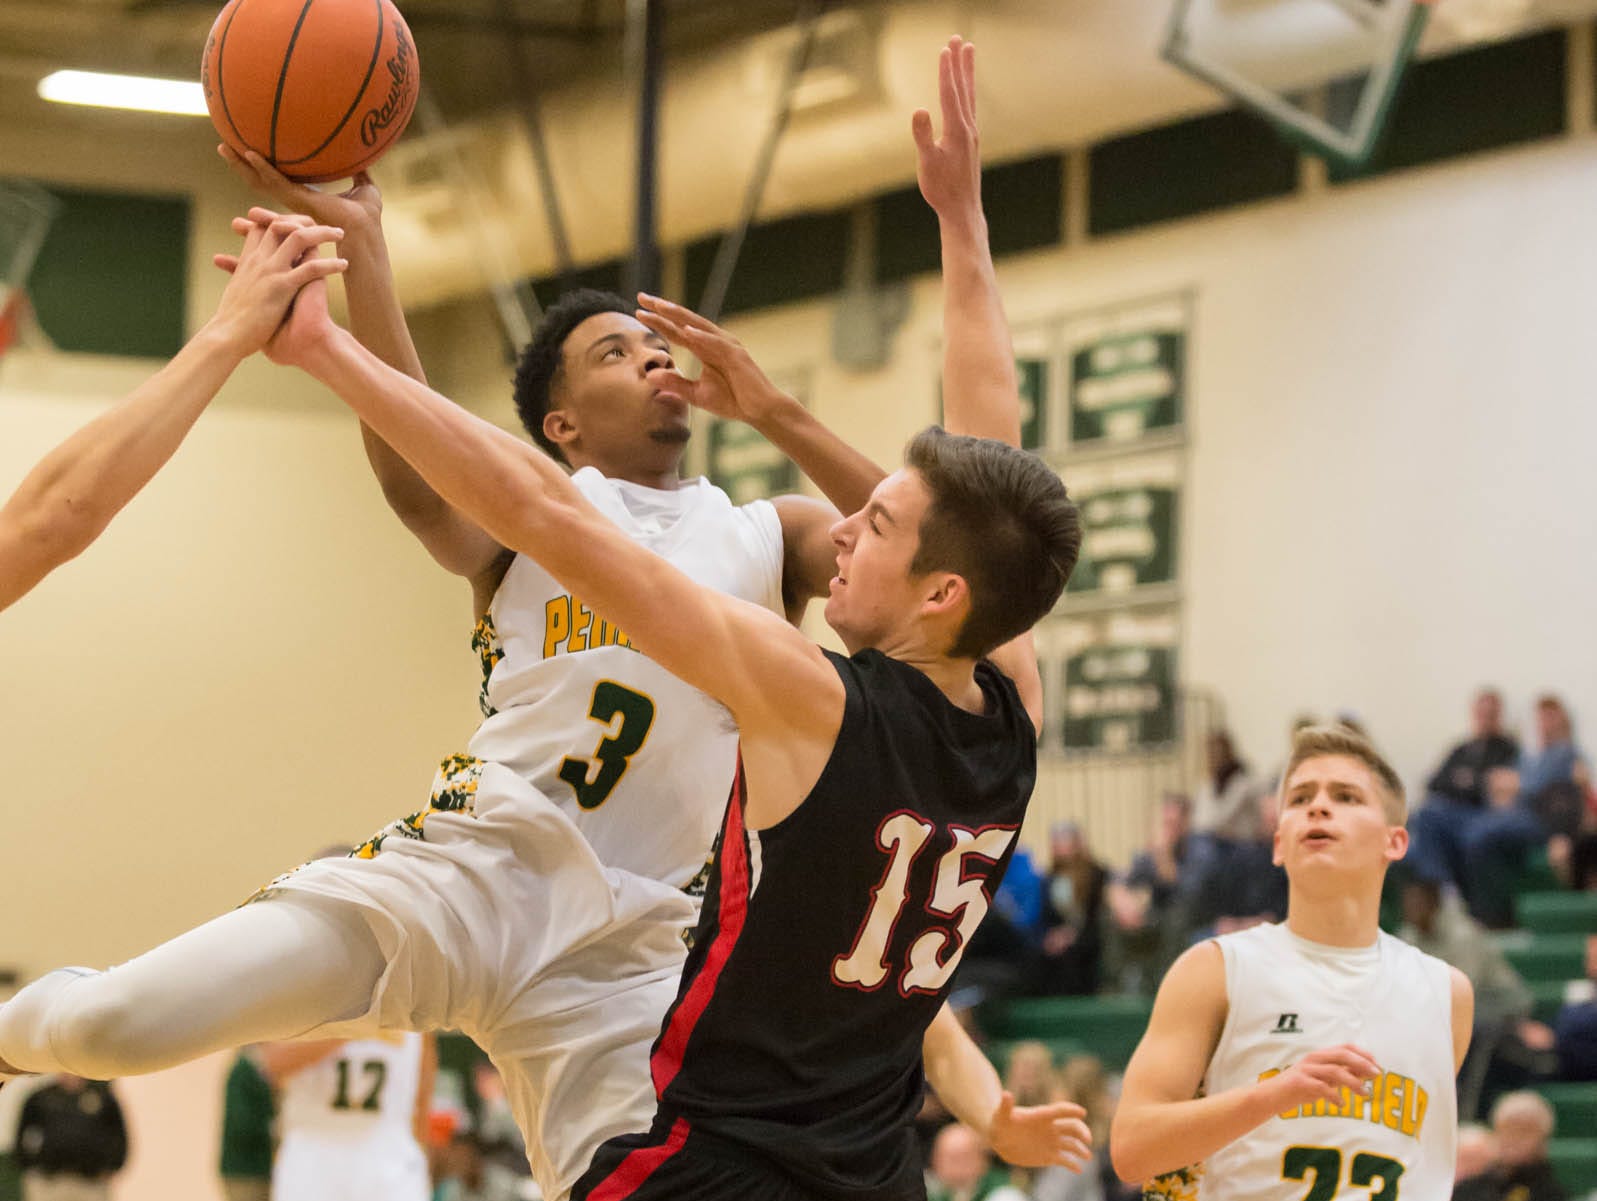 Pennfield's Ronald Jamierson (3) goes for the hoop as Marshall's T. J. Rooco (15) defends during Friday night's game.